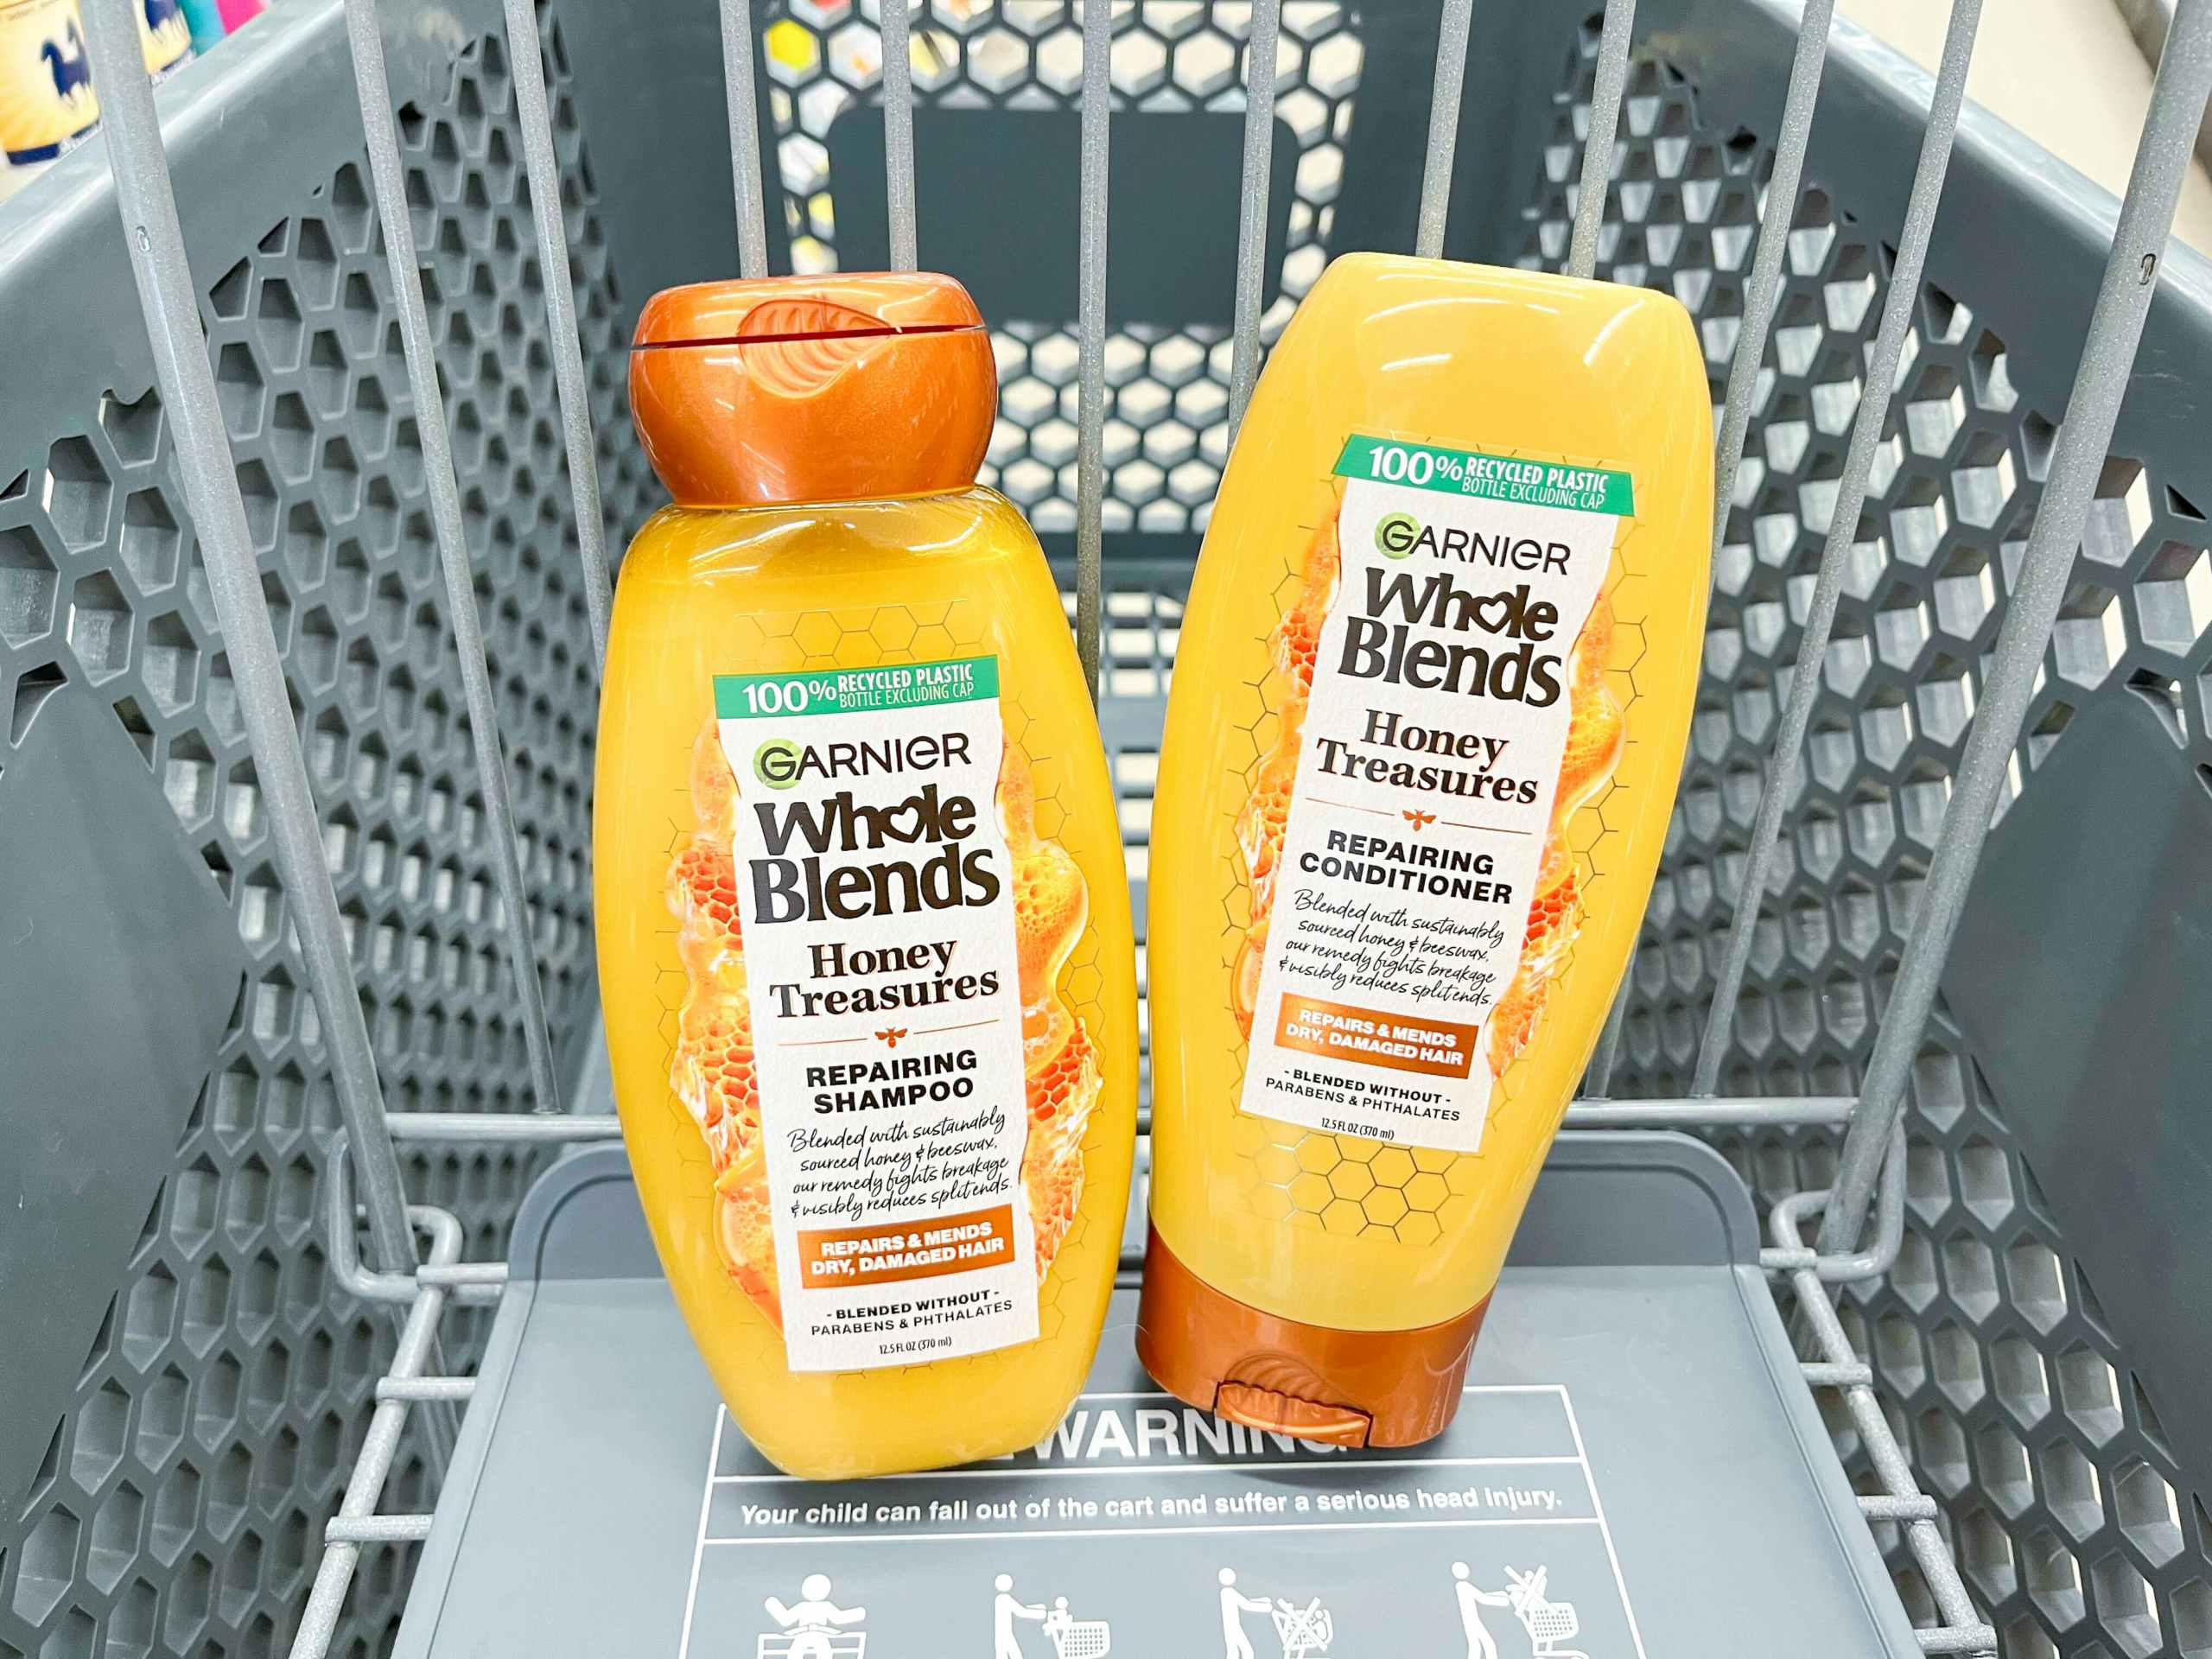 one bottle of Garnier Whole Blends shampoo and conditioner inside cart